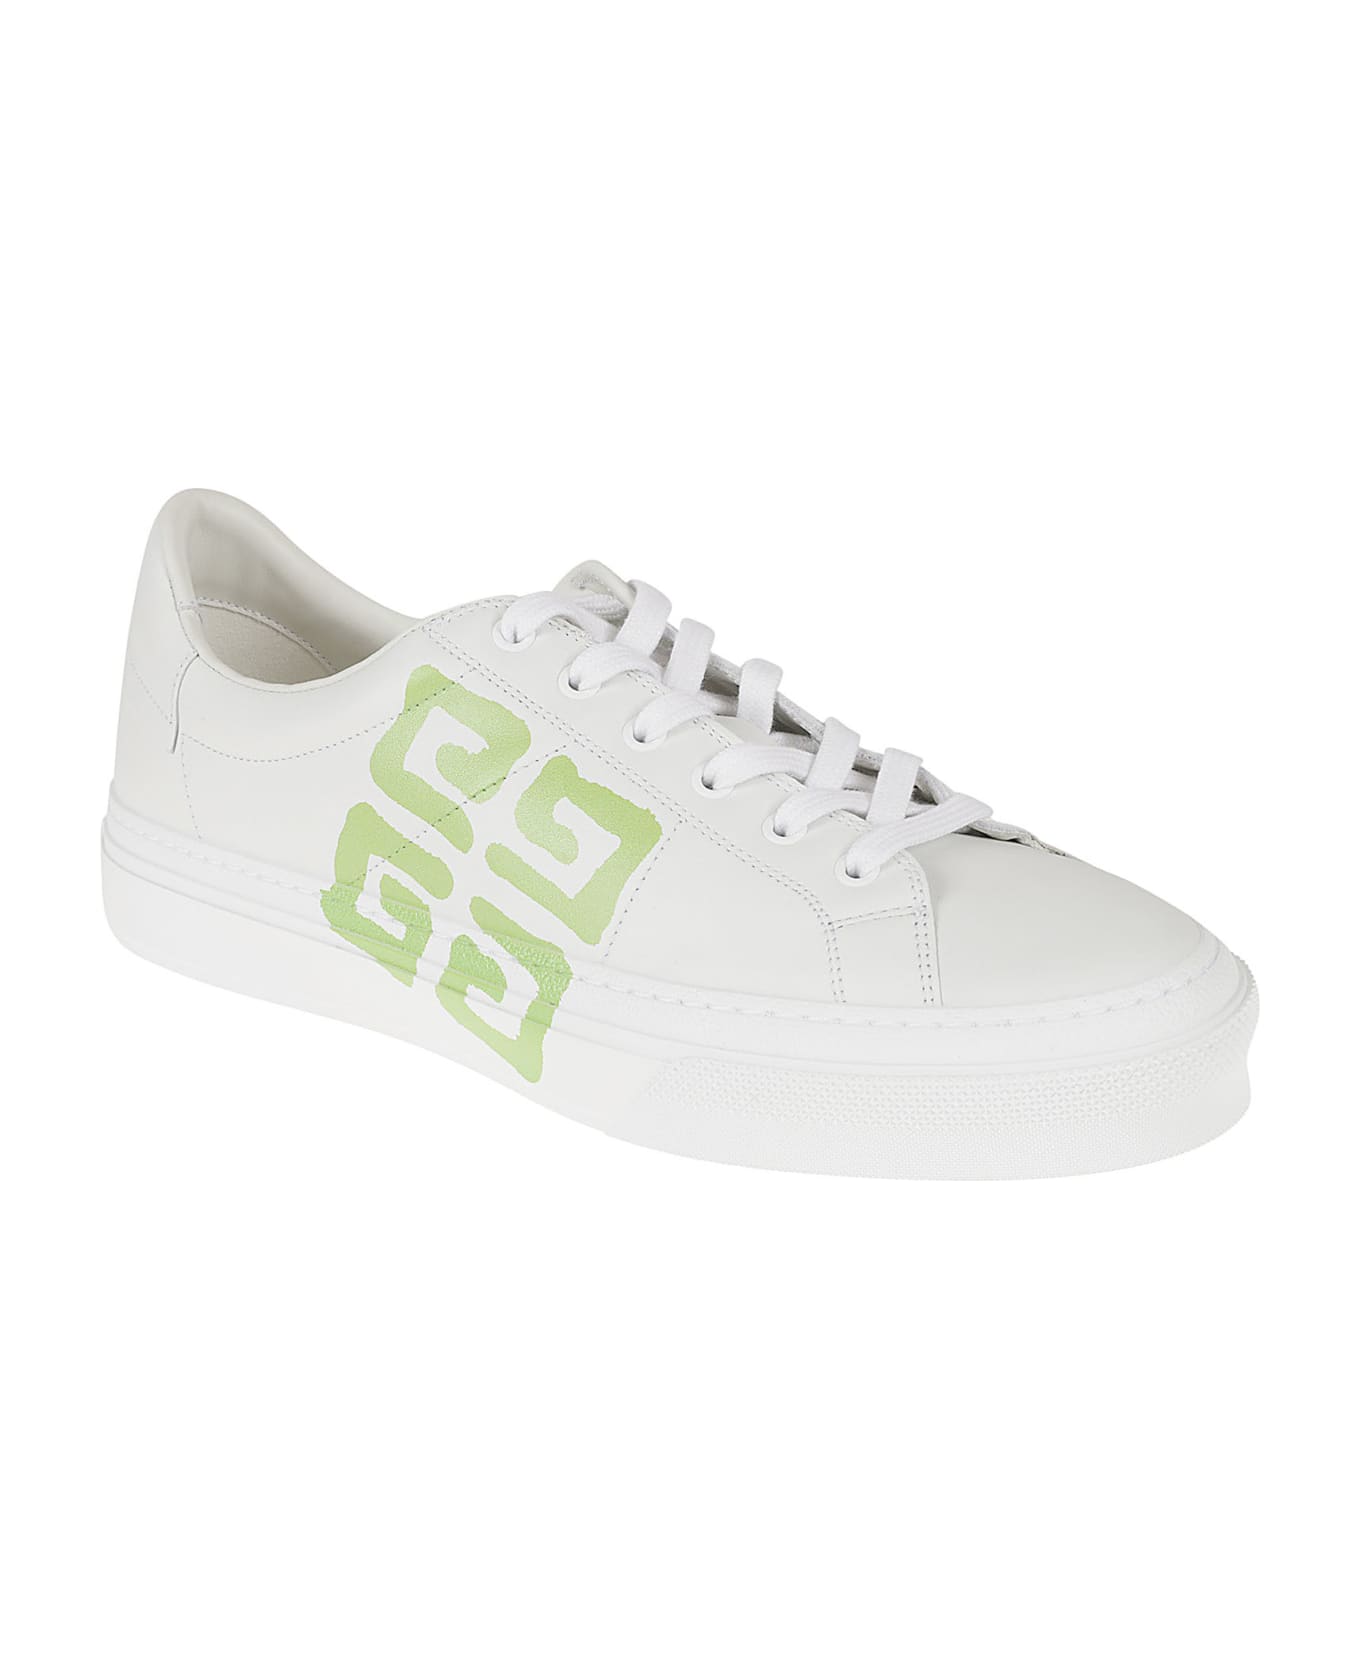 Givenchy City Sport Sneakers - White/Green